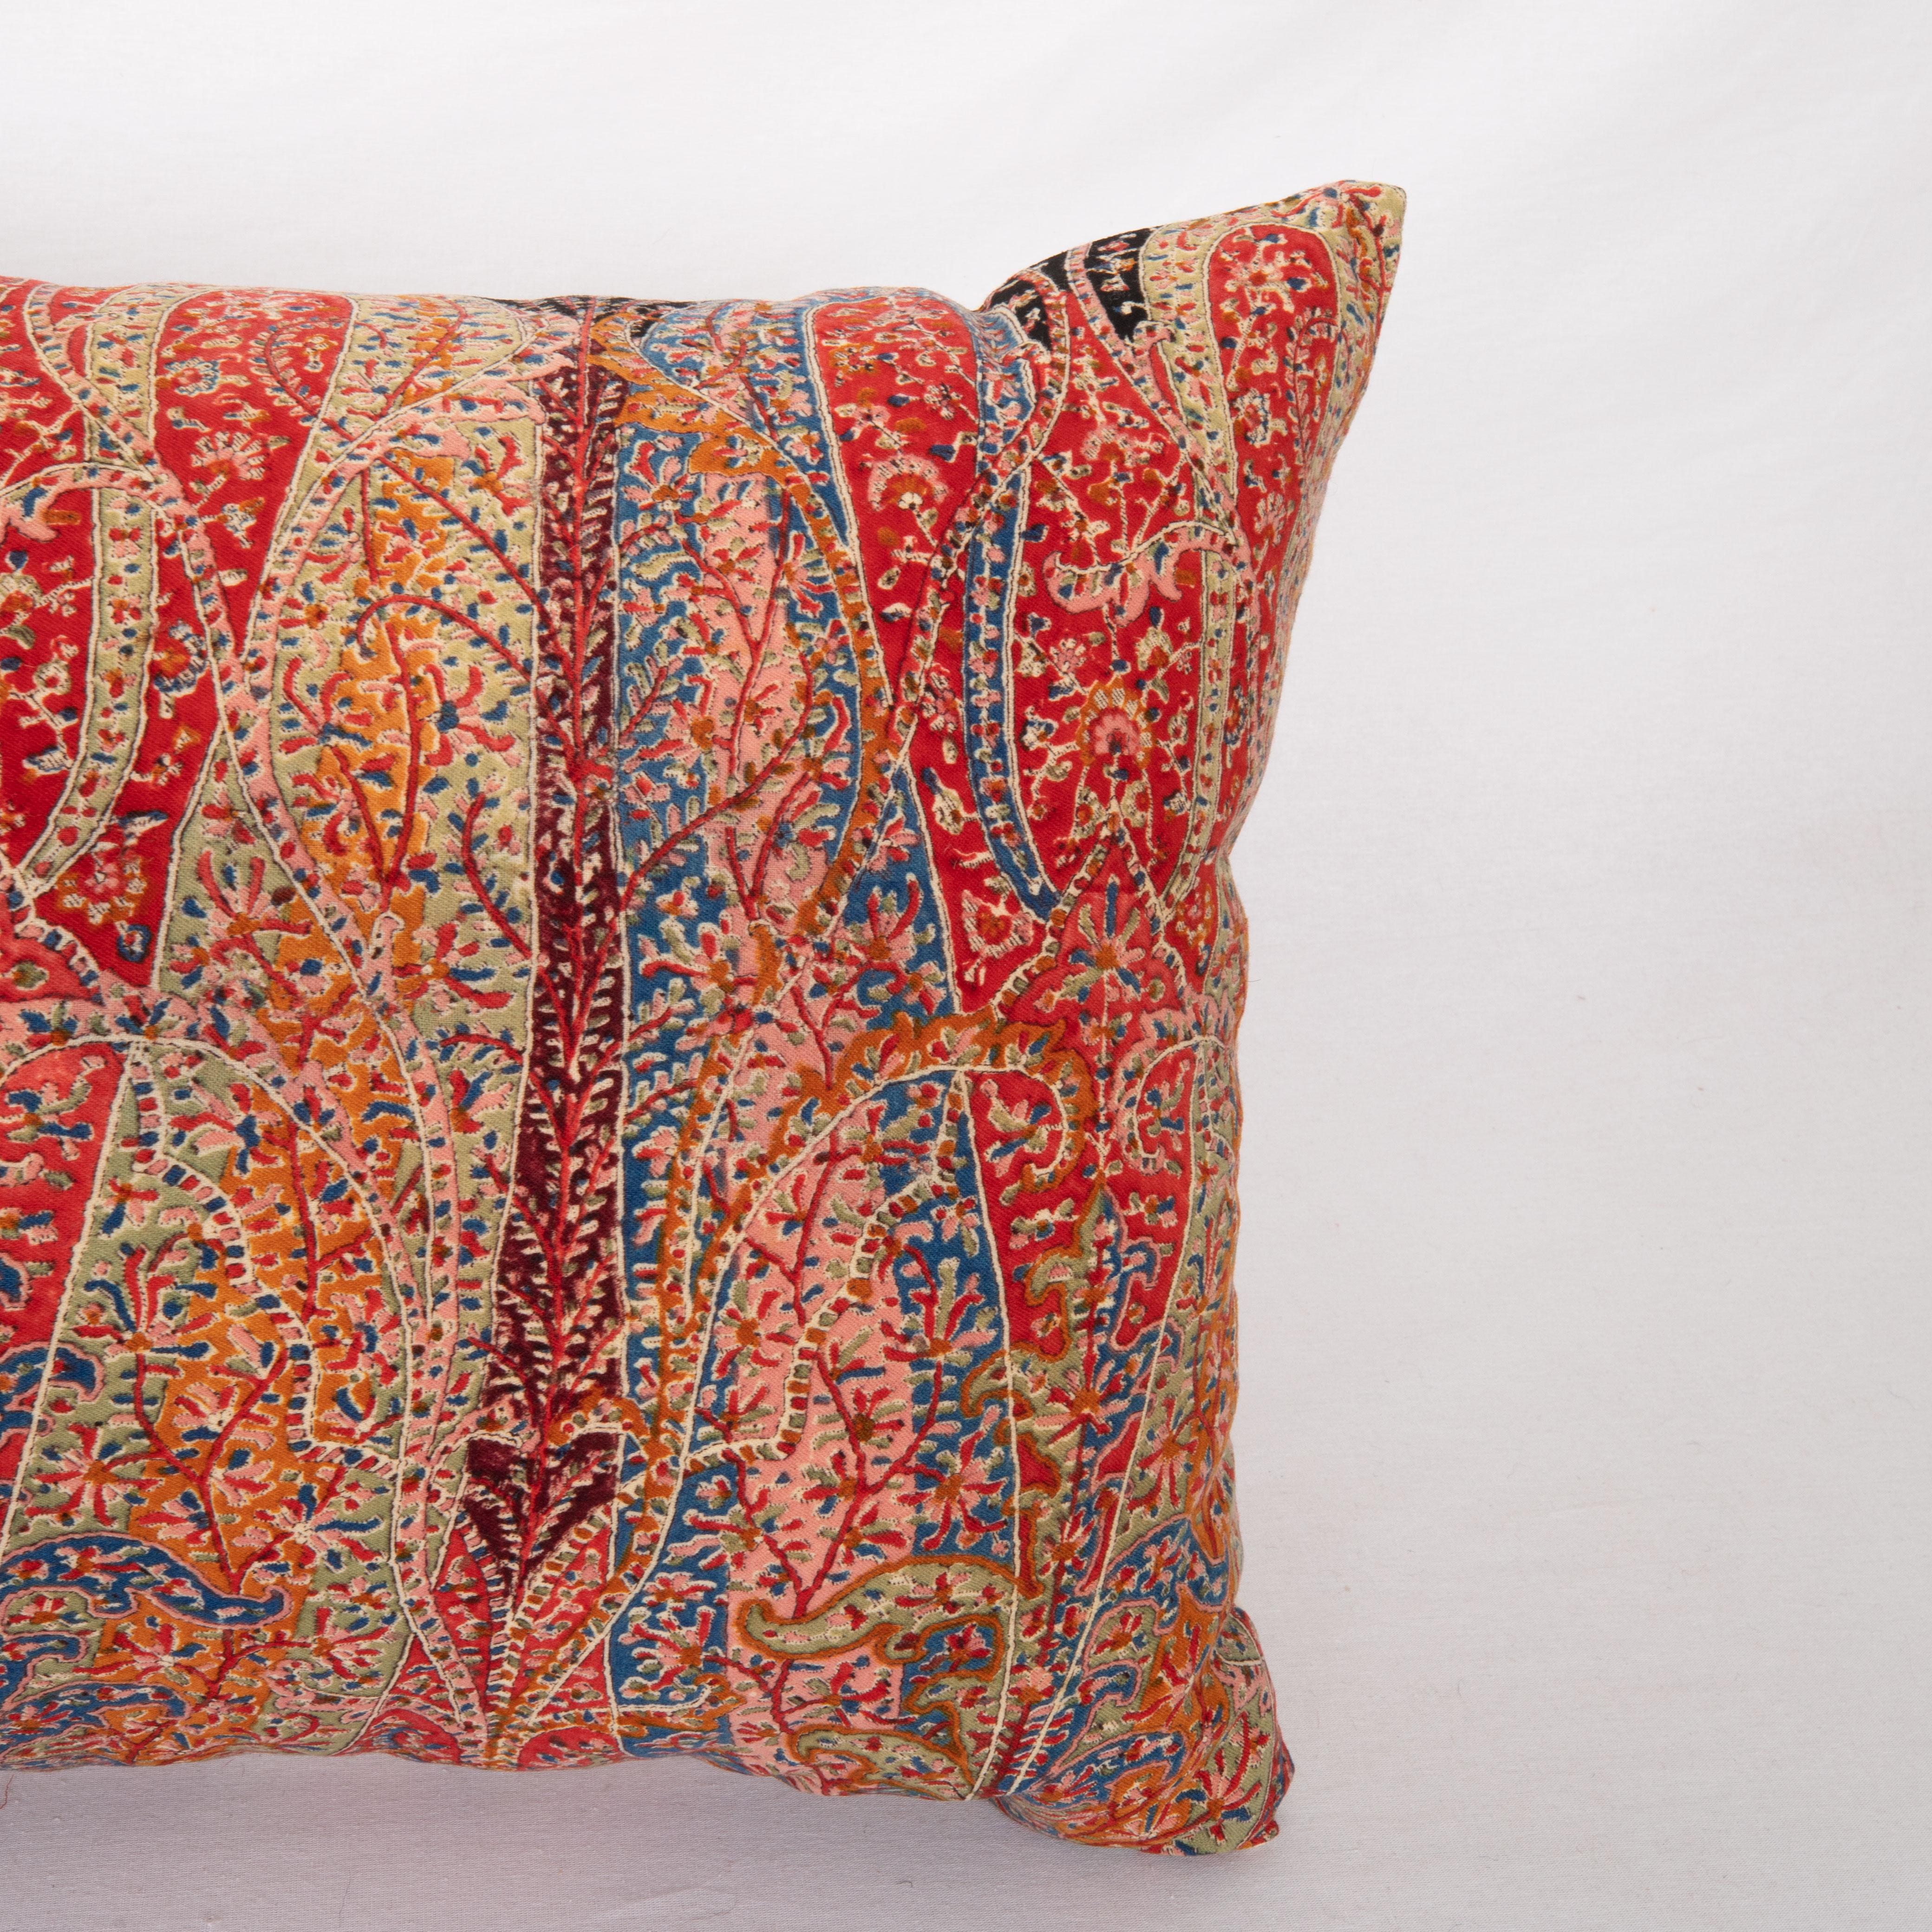 Woven Pillow Cover Made from a an Antique Printed Scottish Paisley Shawl For Sale